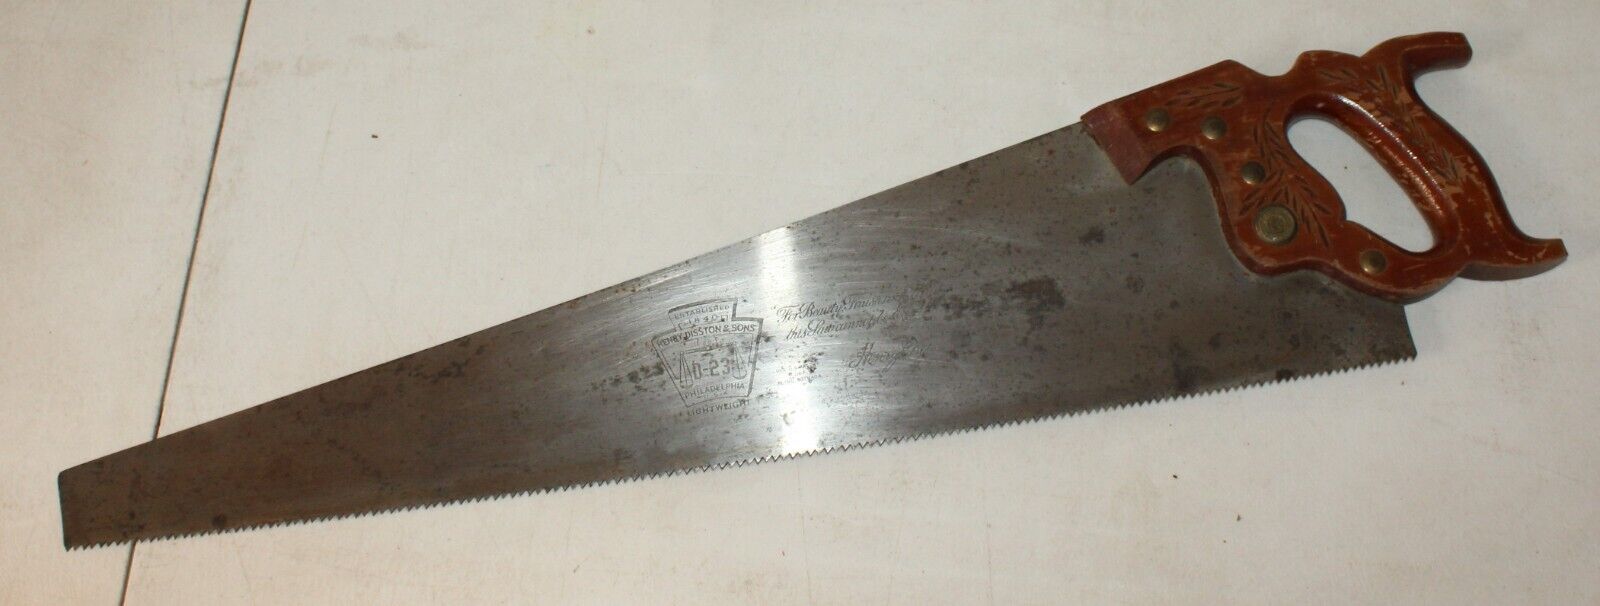 Henry Disston And Sons D-23 Light Weight Hand Saw Rare Aggressive 6TPI